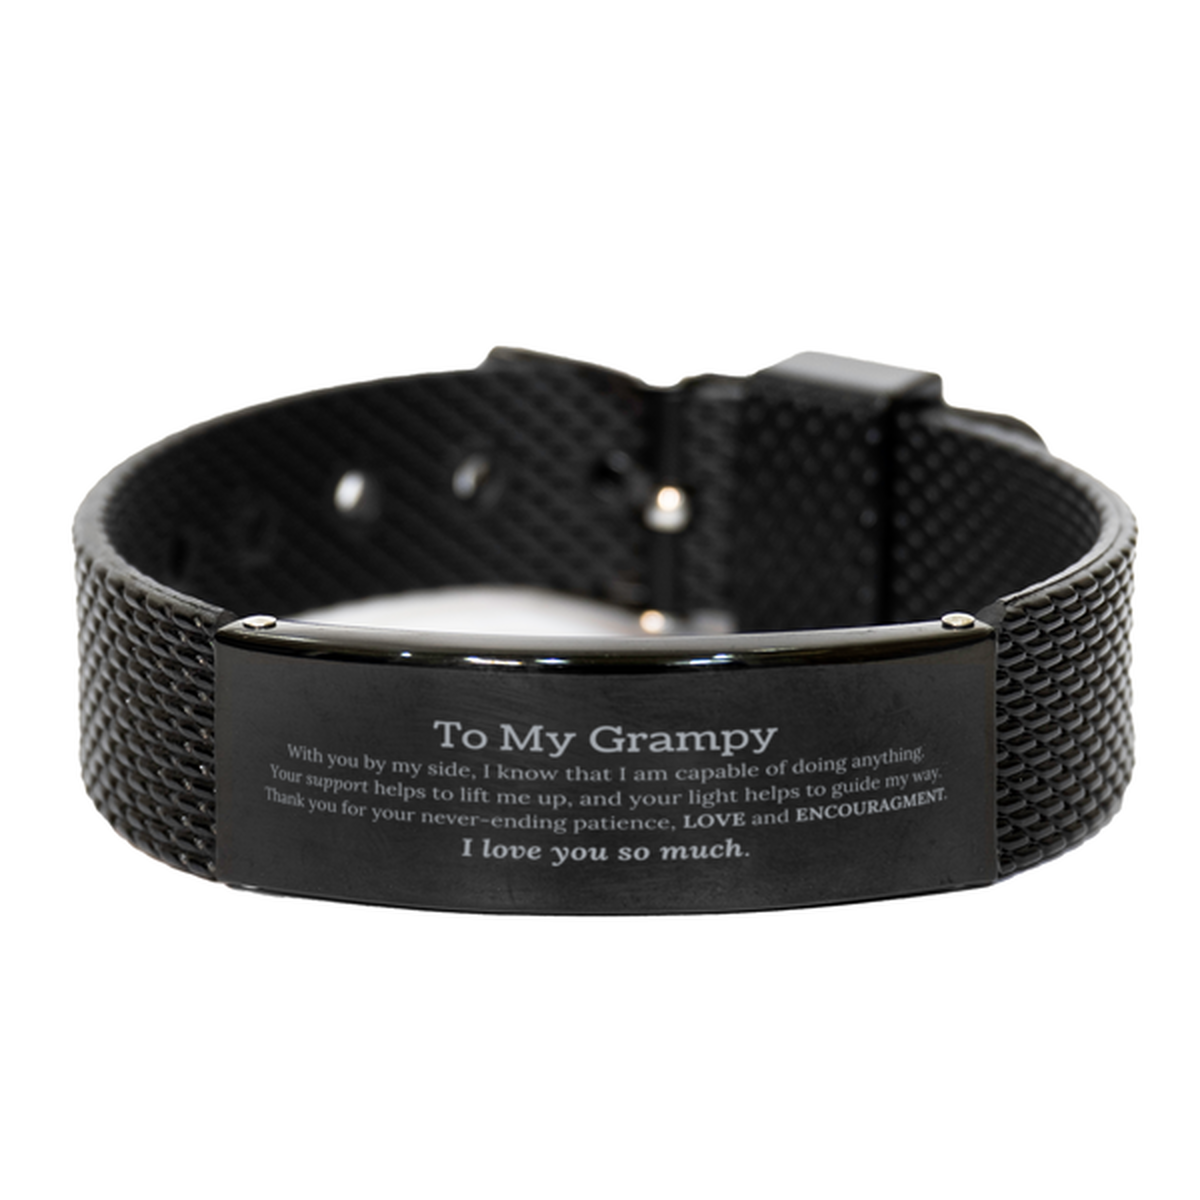 Appreciation Grampy Black Shark Mesh Bracelet Gifts, To My Grampy Birthday Christmas Wedding Keepsake Gifts for Grampy With you by my side, I know that I am capable of doing anything. I love you so much